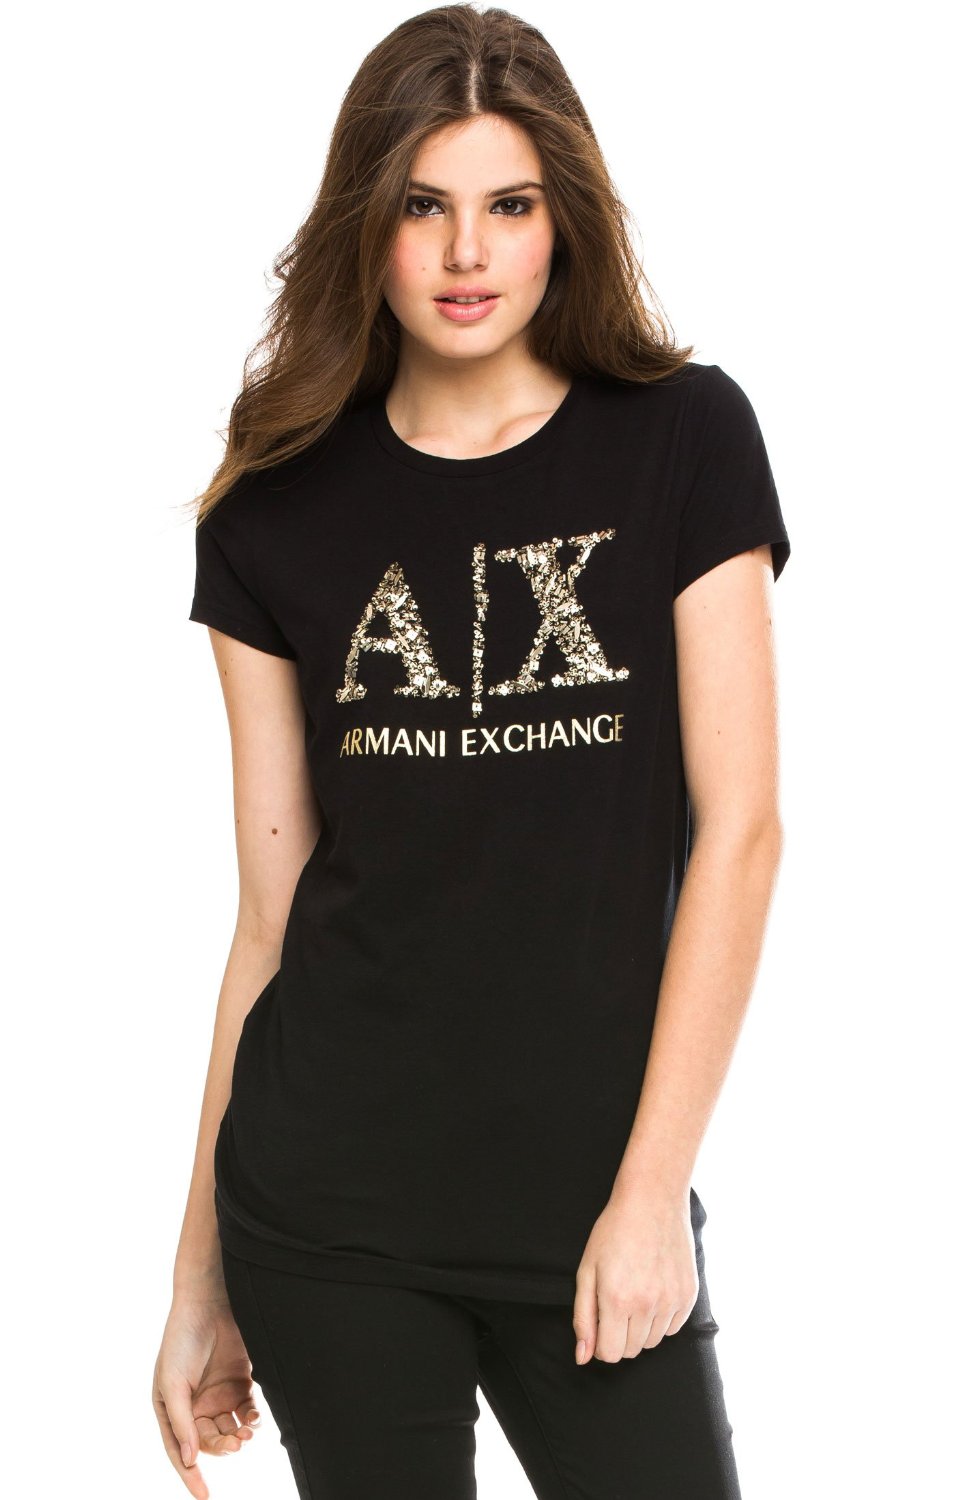 Polly younkers armani exchange icon t shirt patterns sew